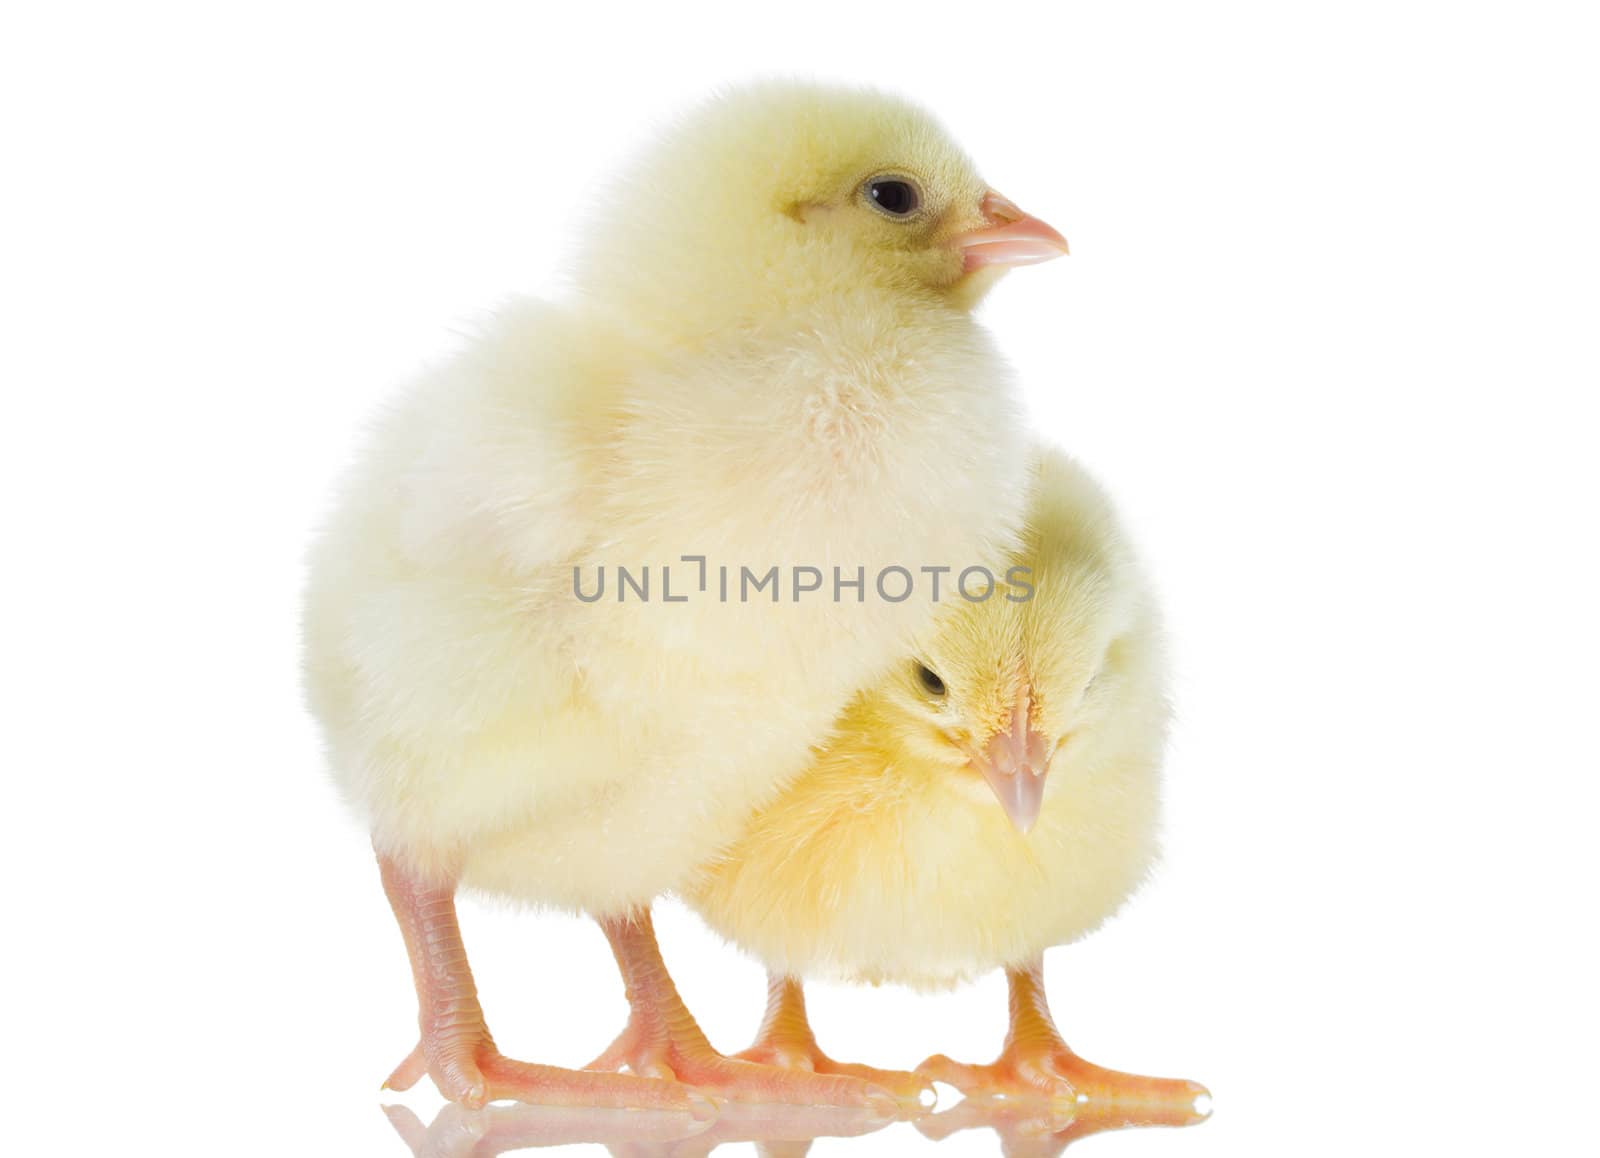 two small yellow chicks, isolated on white